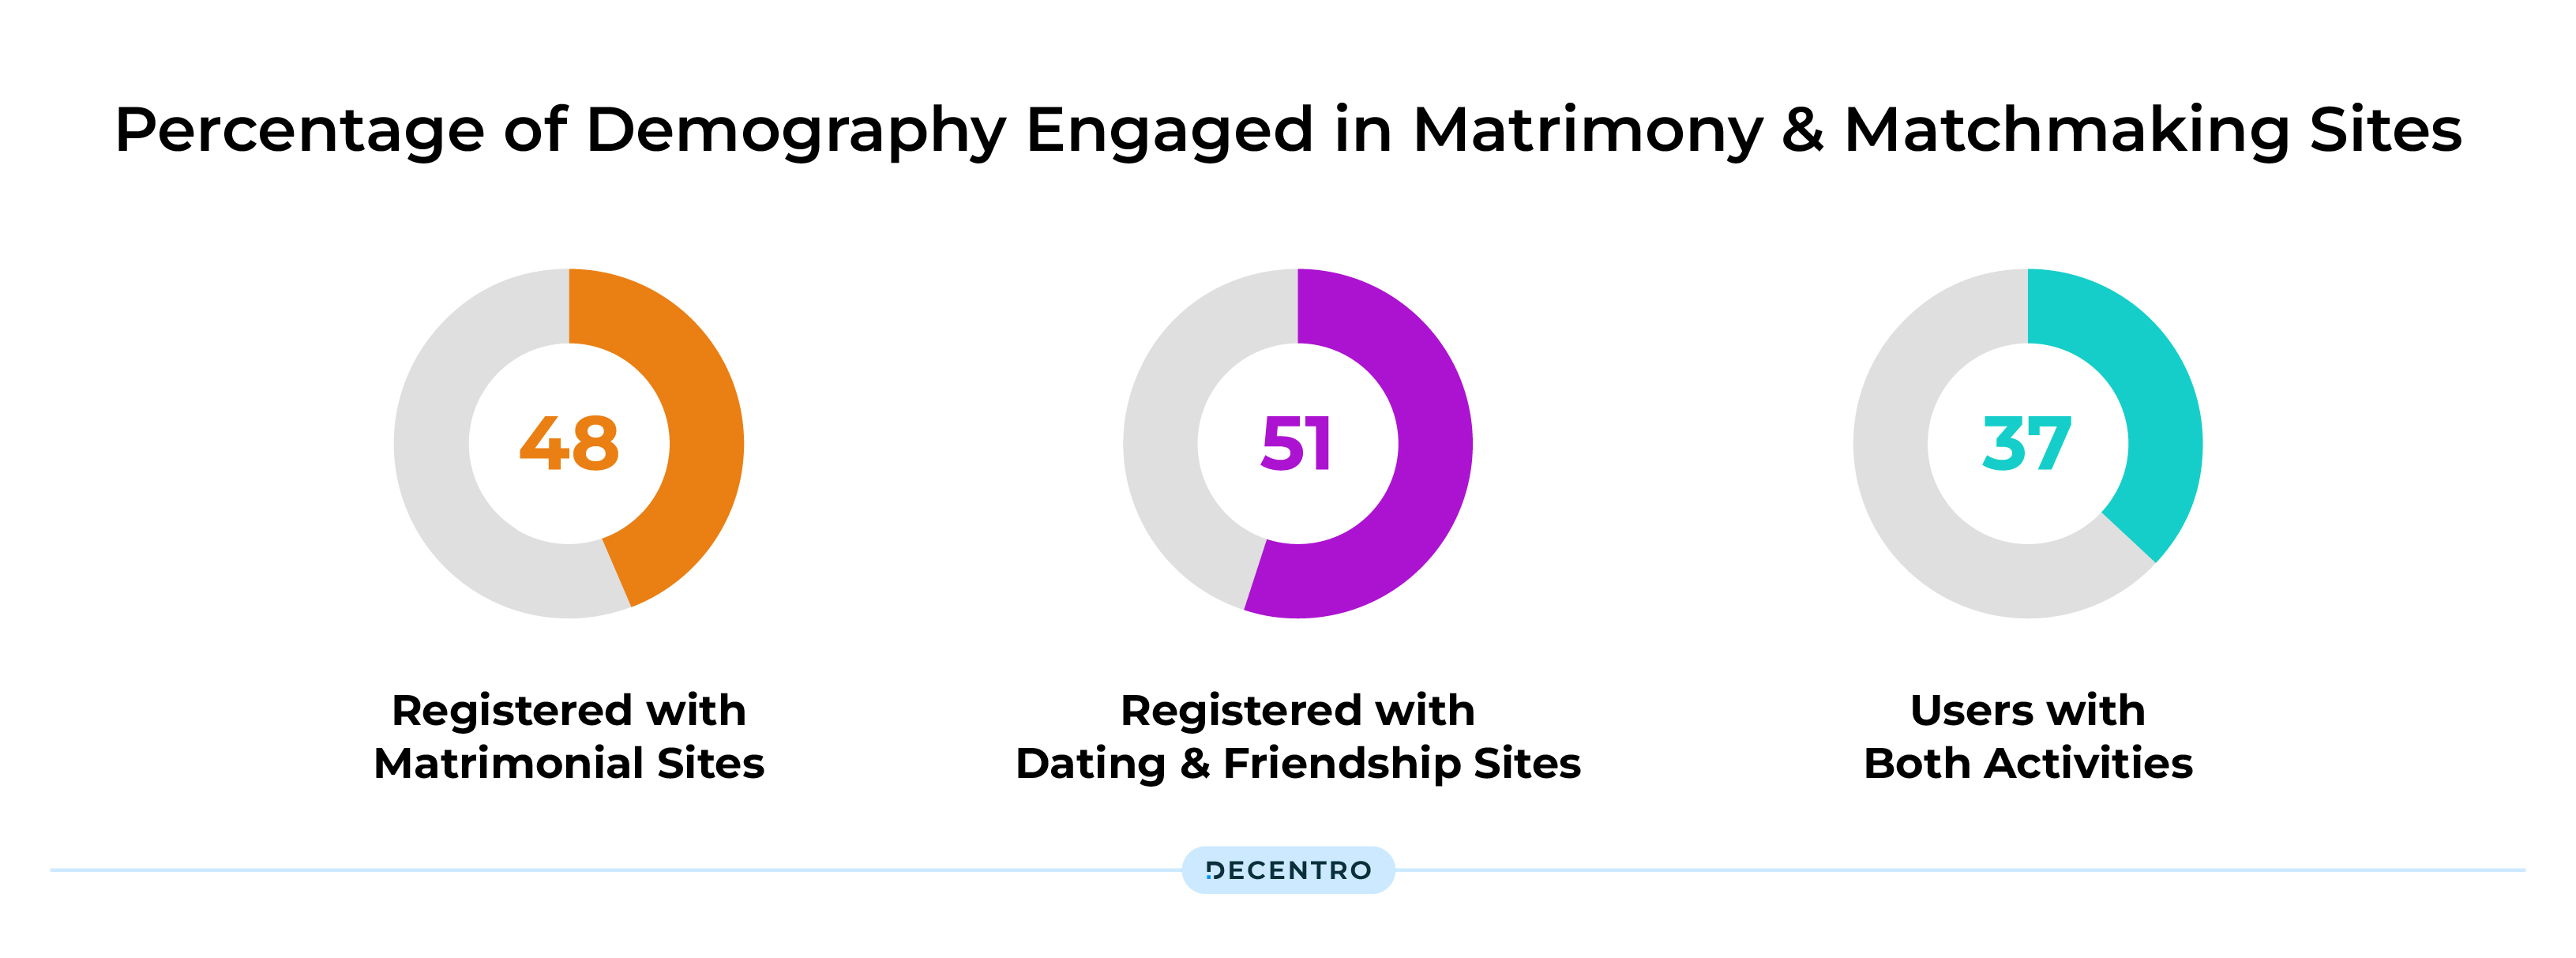 Percentage of Demography Engaged in Matrimony and Matchmaking Sites